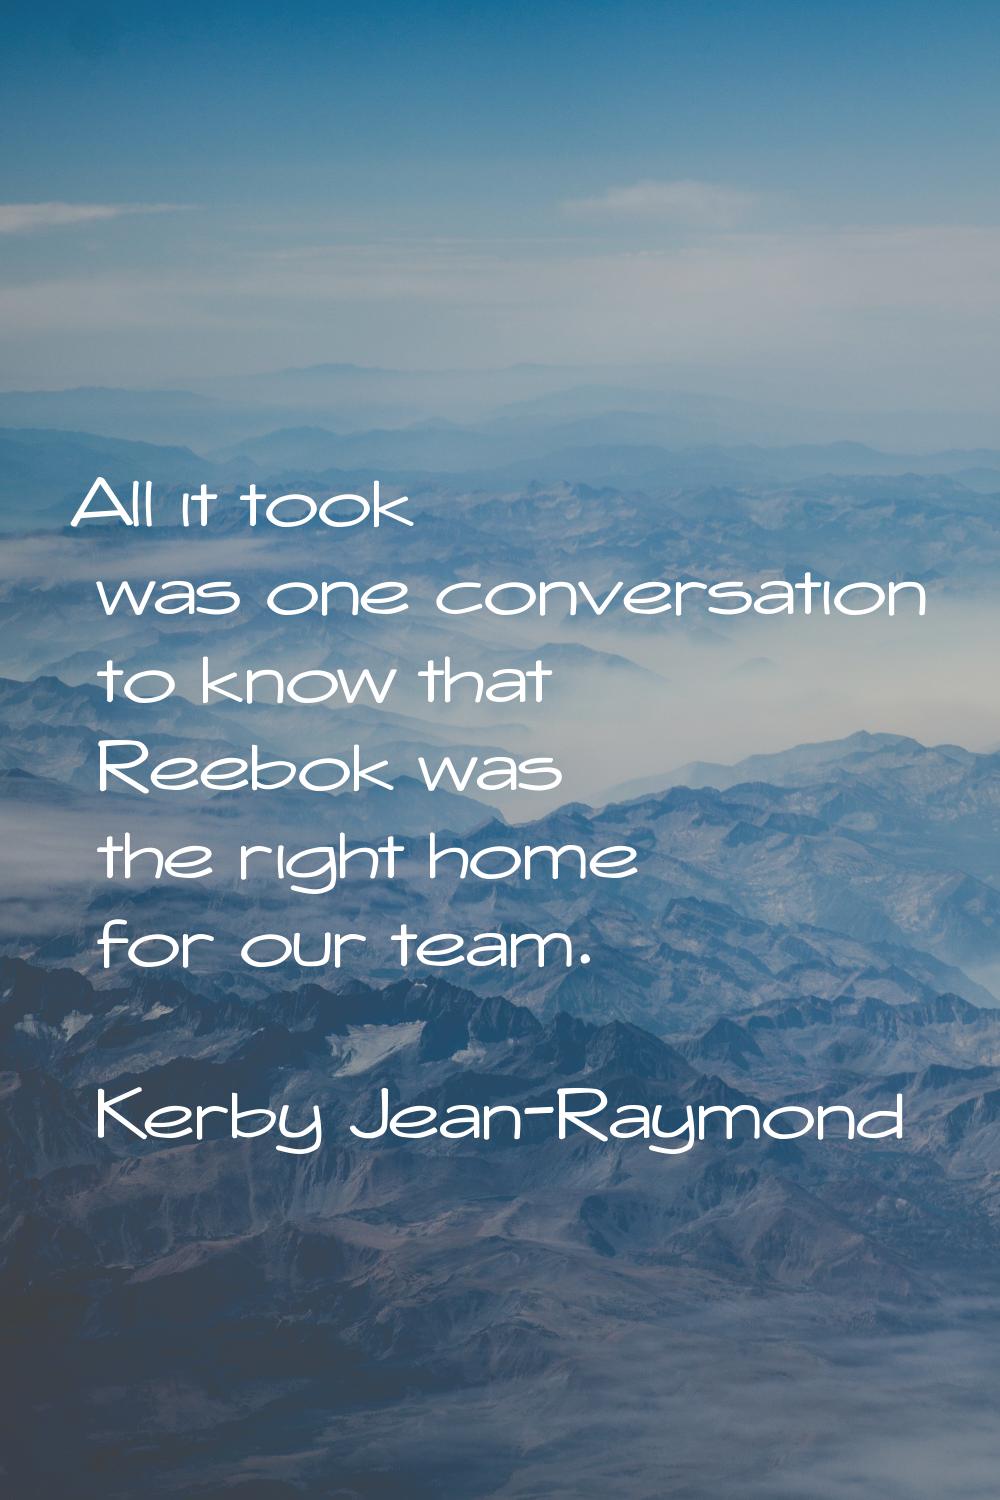 All it took was one conversation to know that Reebok was the right home for our team.